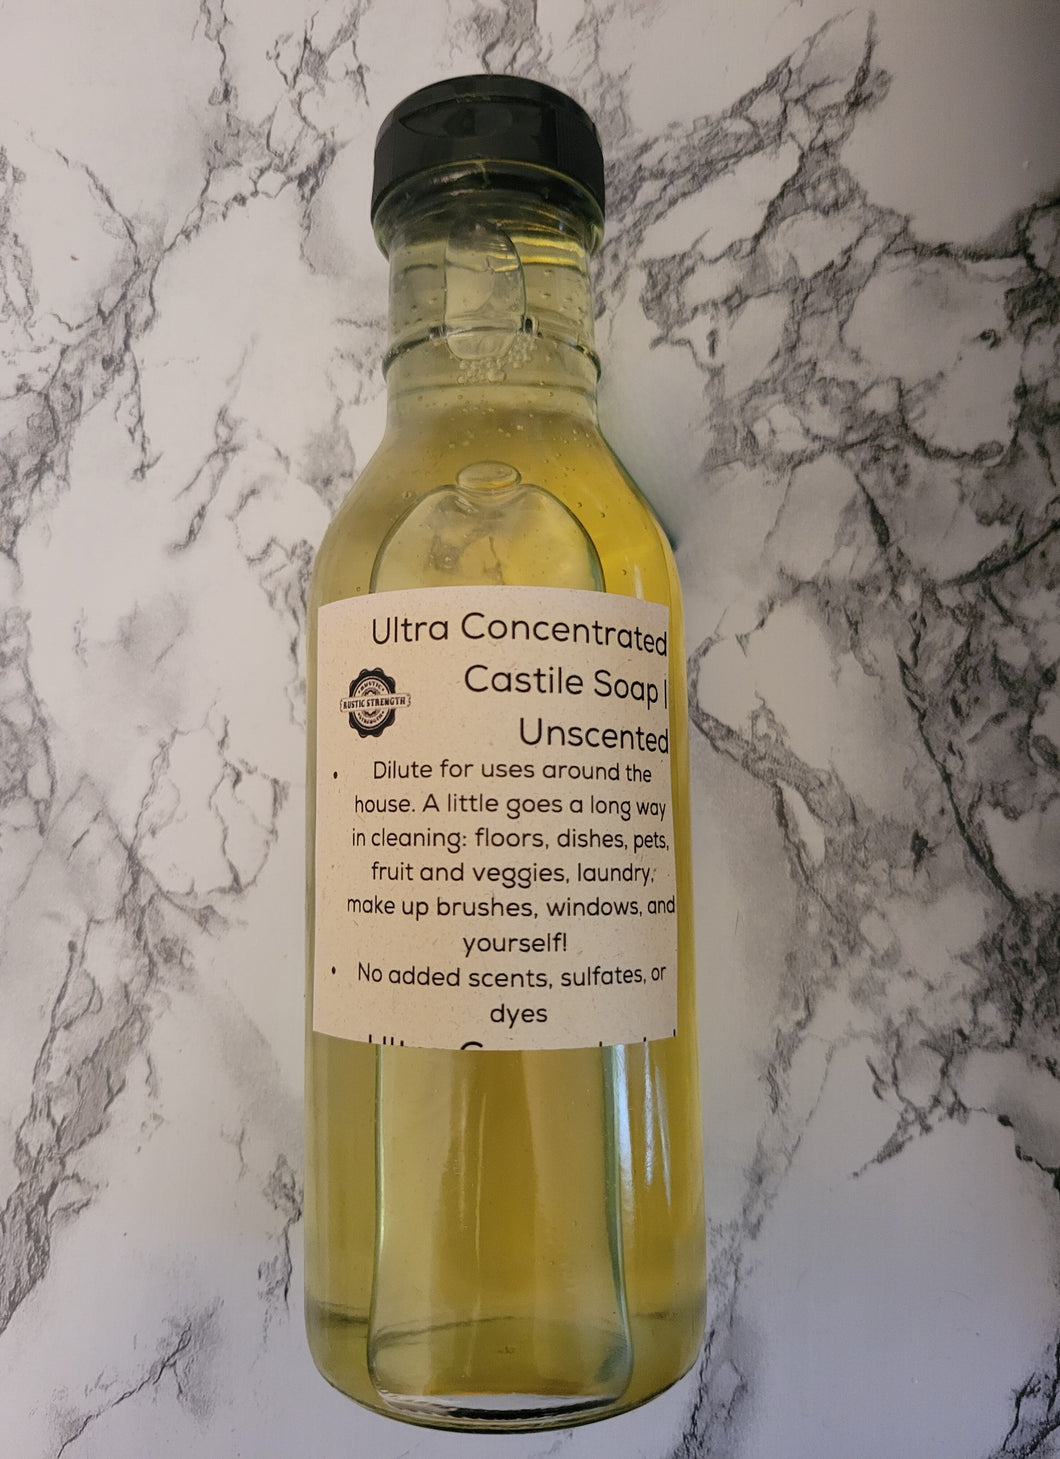 An upcycled glass jar, pre-filled with Rustic Strength brand ultra-concentrated Castile soap.